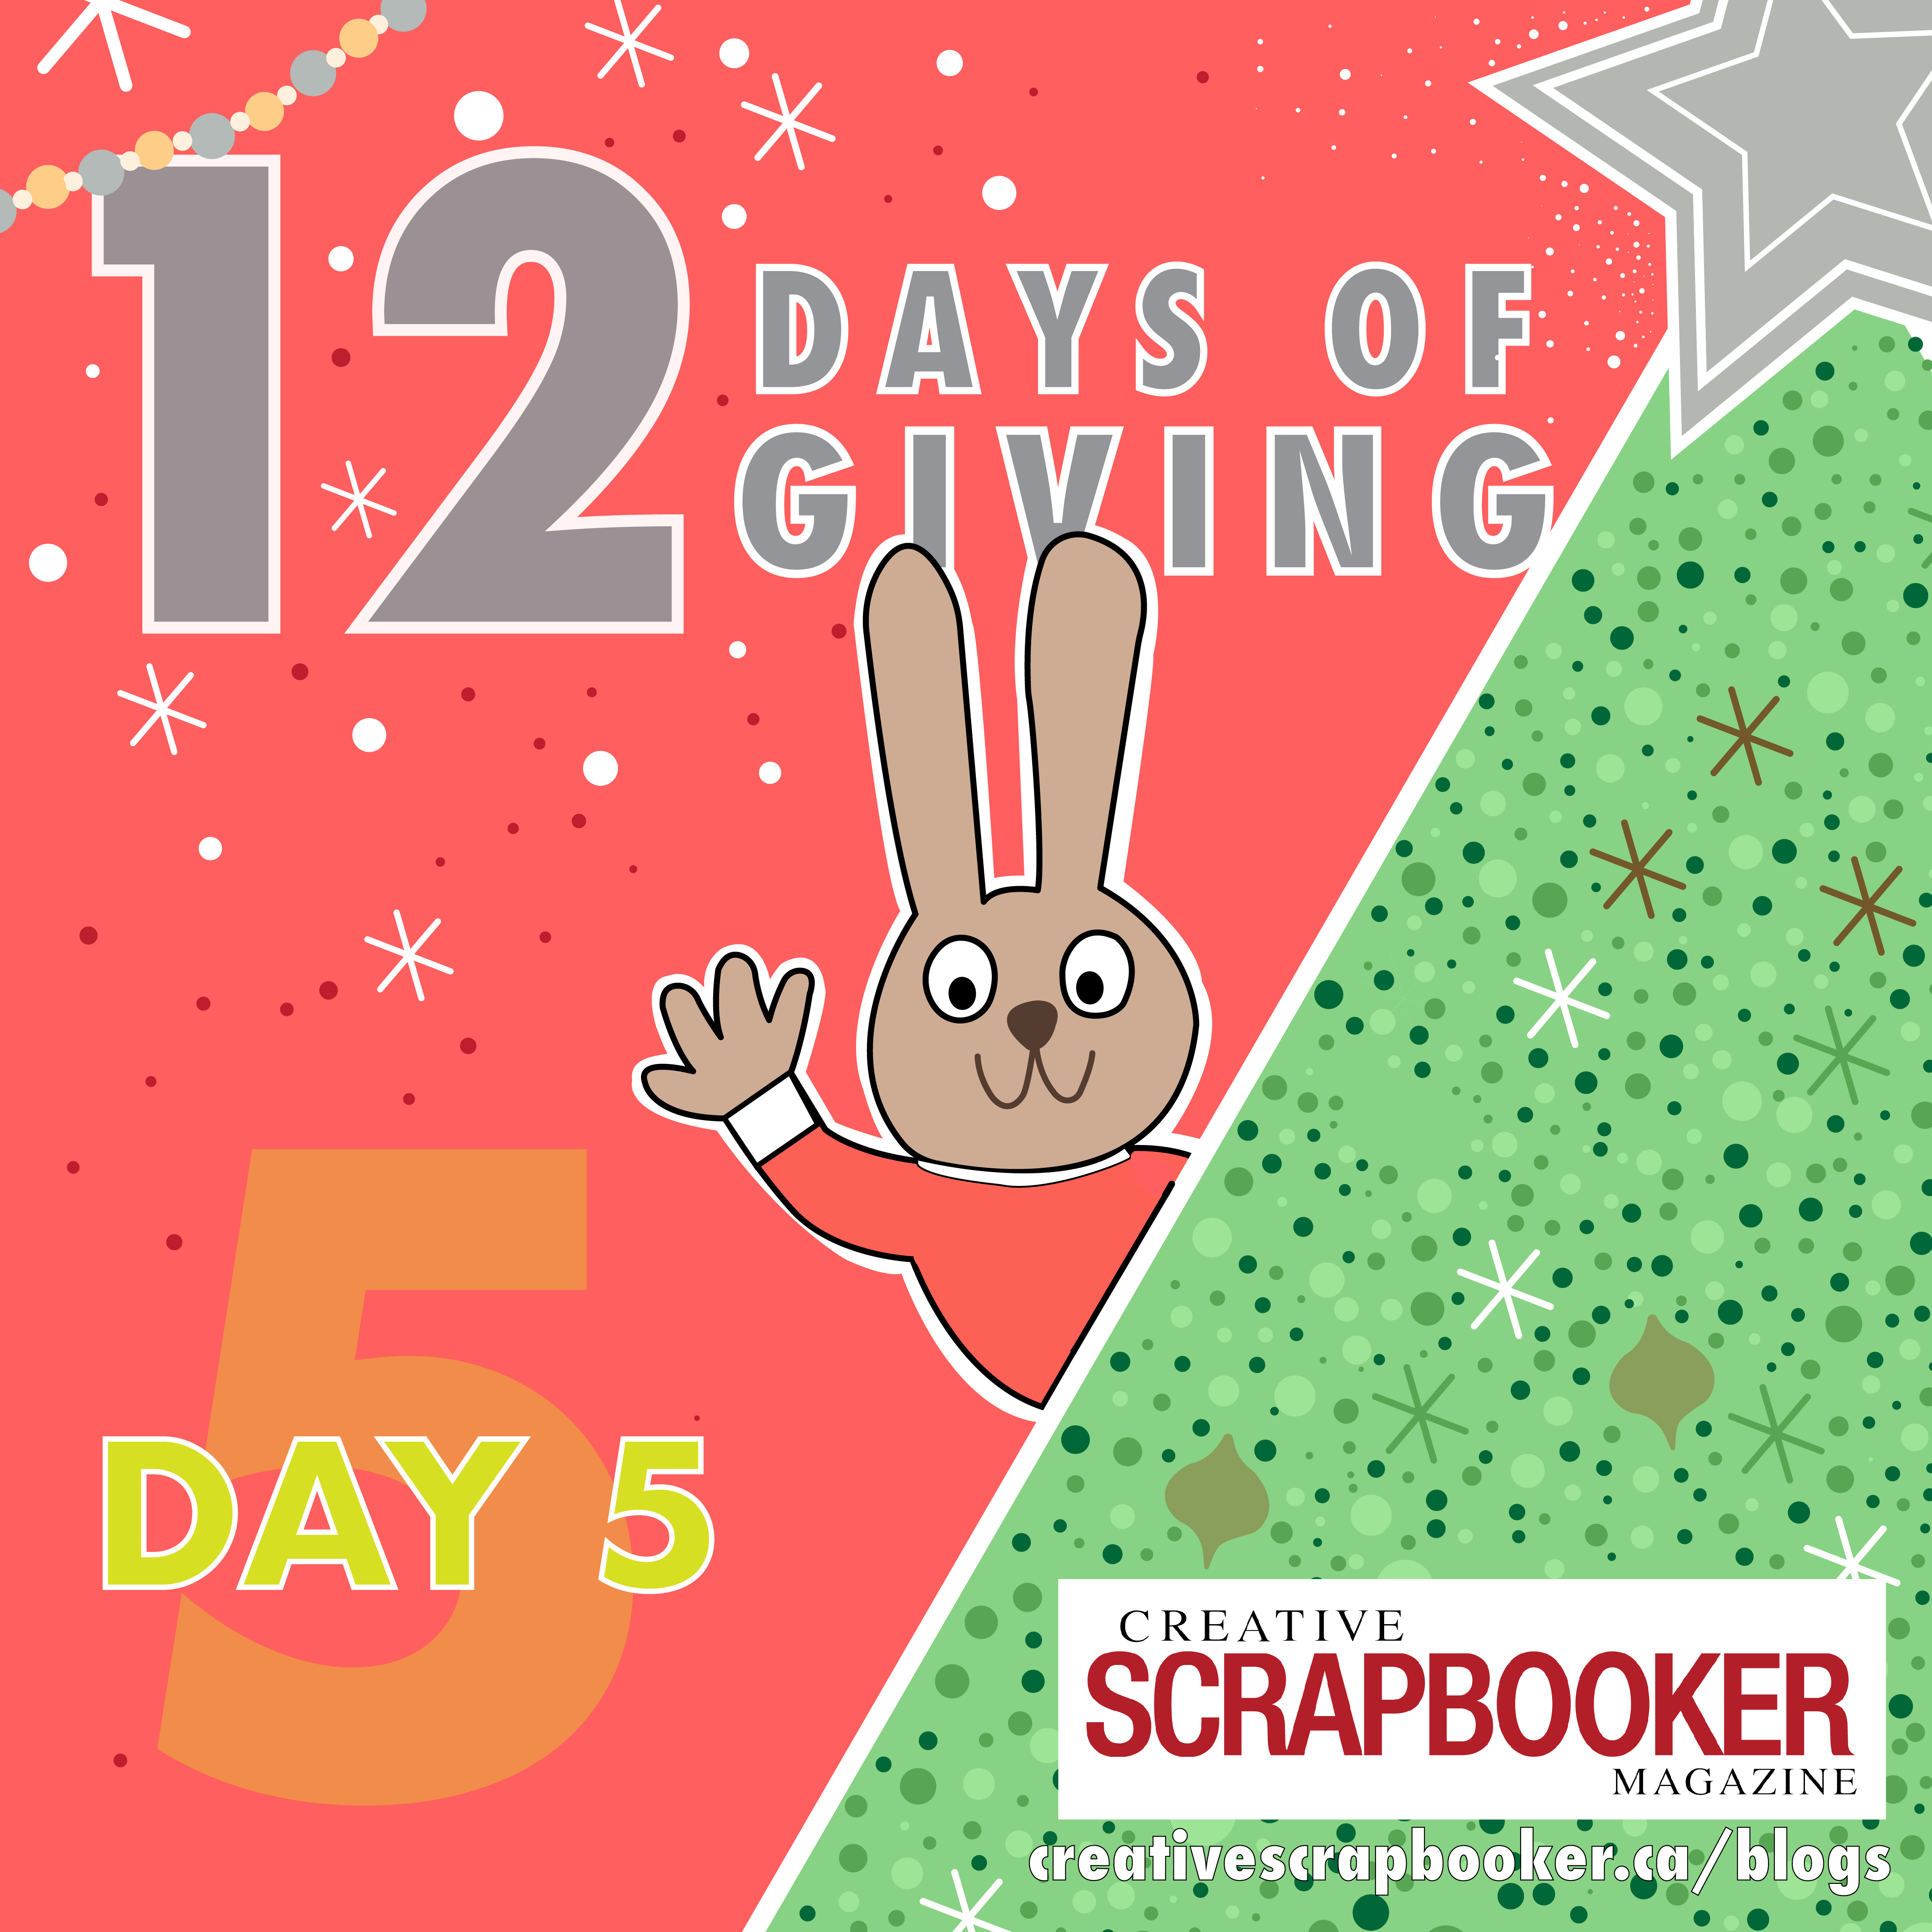 Day #5 of 12 Days of Giving with Creative Scrapbooker Magazine